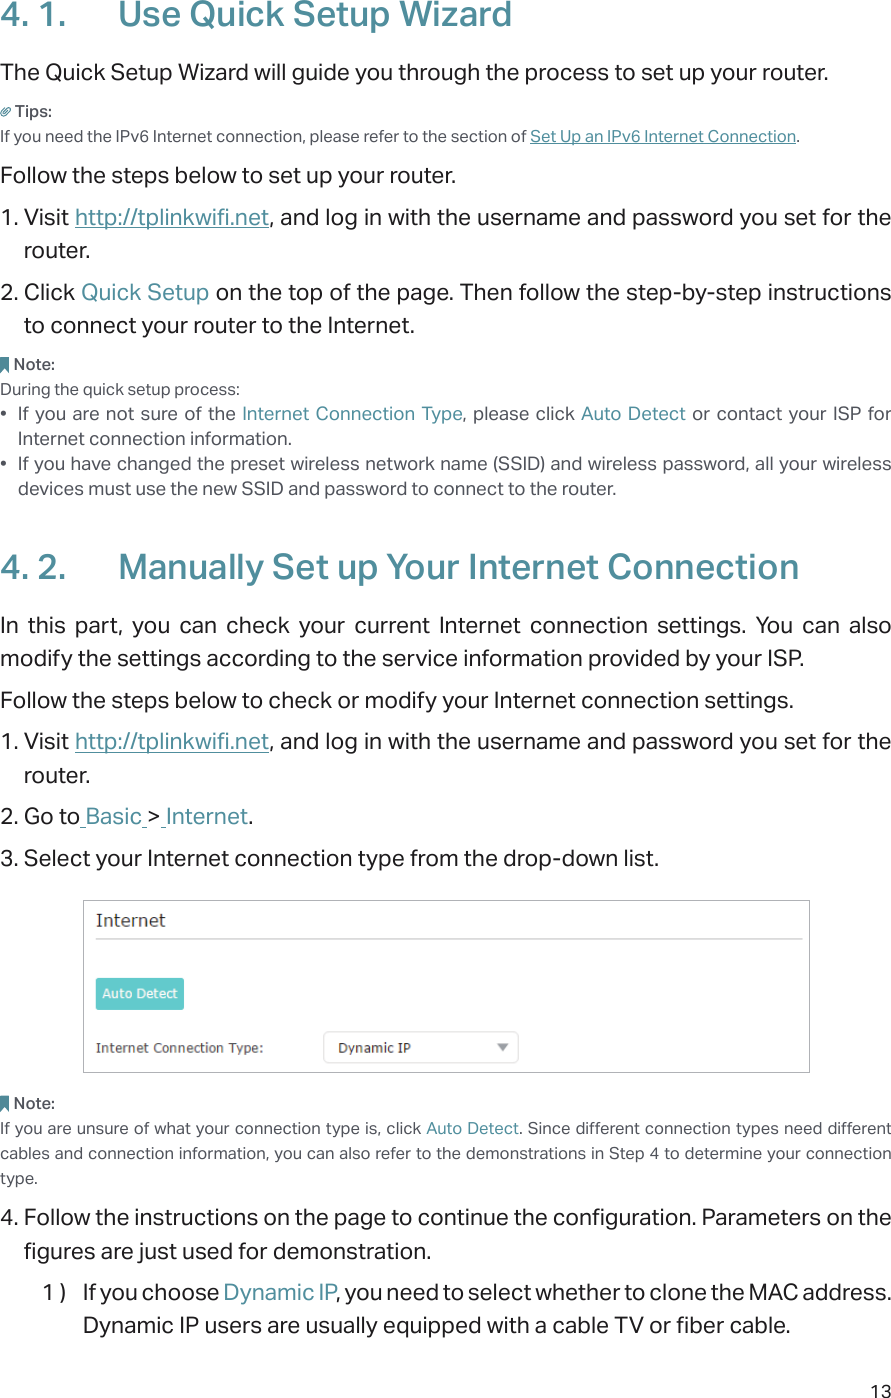 134. 1.  Use Quick Setup WizardThe Quick Setup Wizard will guide you through the process to set up your router.Tips:If you need the IPv6 Internet connection, please refer to the section of Set Up an IPv6 Internet Connection.Follow the steps below to set up your router.1. Visit http://tplinkwifi.net, and log in with the username and password you set for the router.2. Click Quick Setup on the top of the page. Then follow the step-by-step instructions to connect your router to the Internet.Note:During the quick setup process:•  If you are not sure of the Internet Connection Type, please click Auto Detect or contact your ISP for Internet connection information.•  If you have changed the preset wireless network name (SSID) and wireless password, all your wireless devices must use the new SSID and password to connect to the router.4. 2.  Manually Set up Your Internet Connection In this part, you can check your current Internet connection settings. You can also modify the settings according to the service information provided by your ISP.Follow the steps below to check or modify your Internet connection settings.1. Visit http://tplinkwifi.net, and log in with the username and password you set for the router.2. Go to Basic &gt; Internet.3. Select your Internet connection type from the drop-down list. Note:If you are unsure of what your connection type is, click Auto Detect. Since different connection types need different cables and connection information, you can also refer to the demonstrations in Step 4 to determine your connection type.4. Follow the instructions on the page to continue the configuration. Parameters on the figures are just used for demonstration. 1 )  If you choose Dynamic IP, you need to select whether to clone the MAC address. Dynamic IP users are usually equipped with a cable TV or fiber cable.